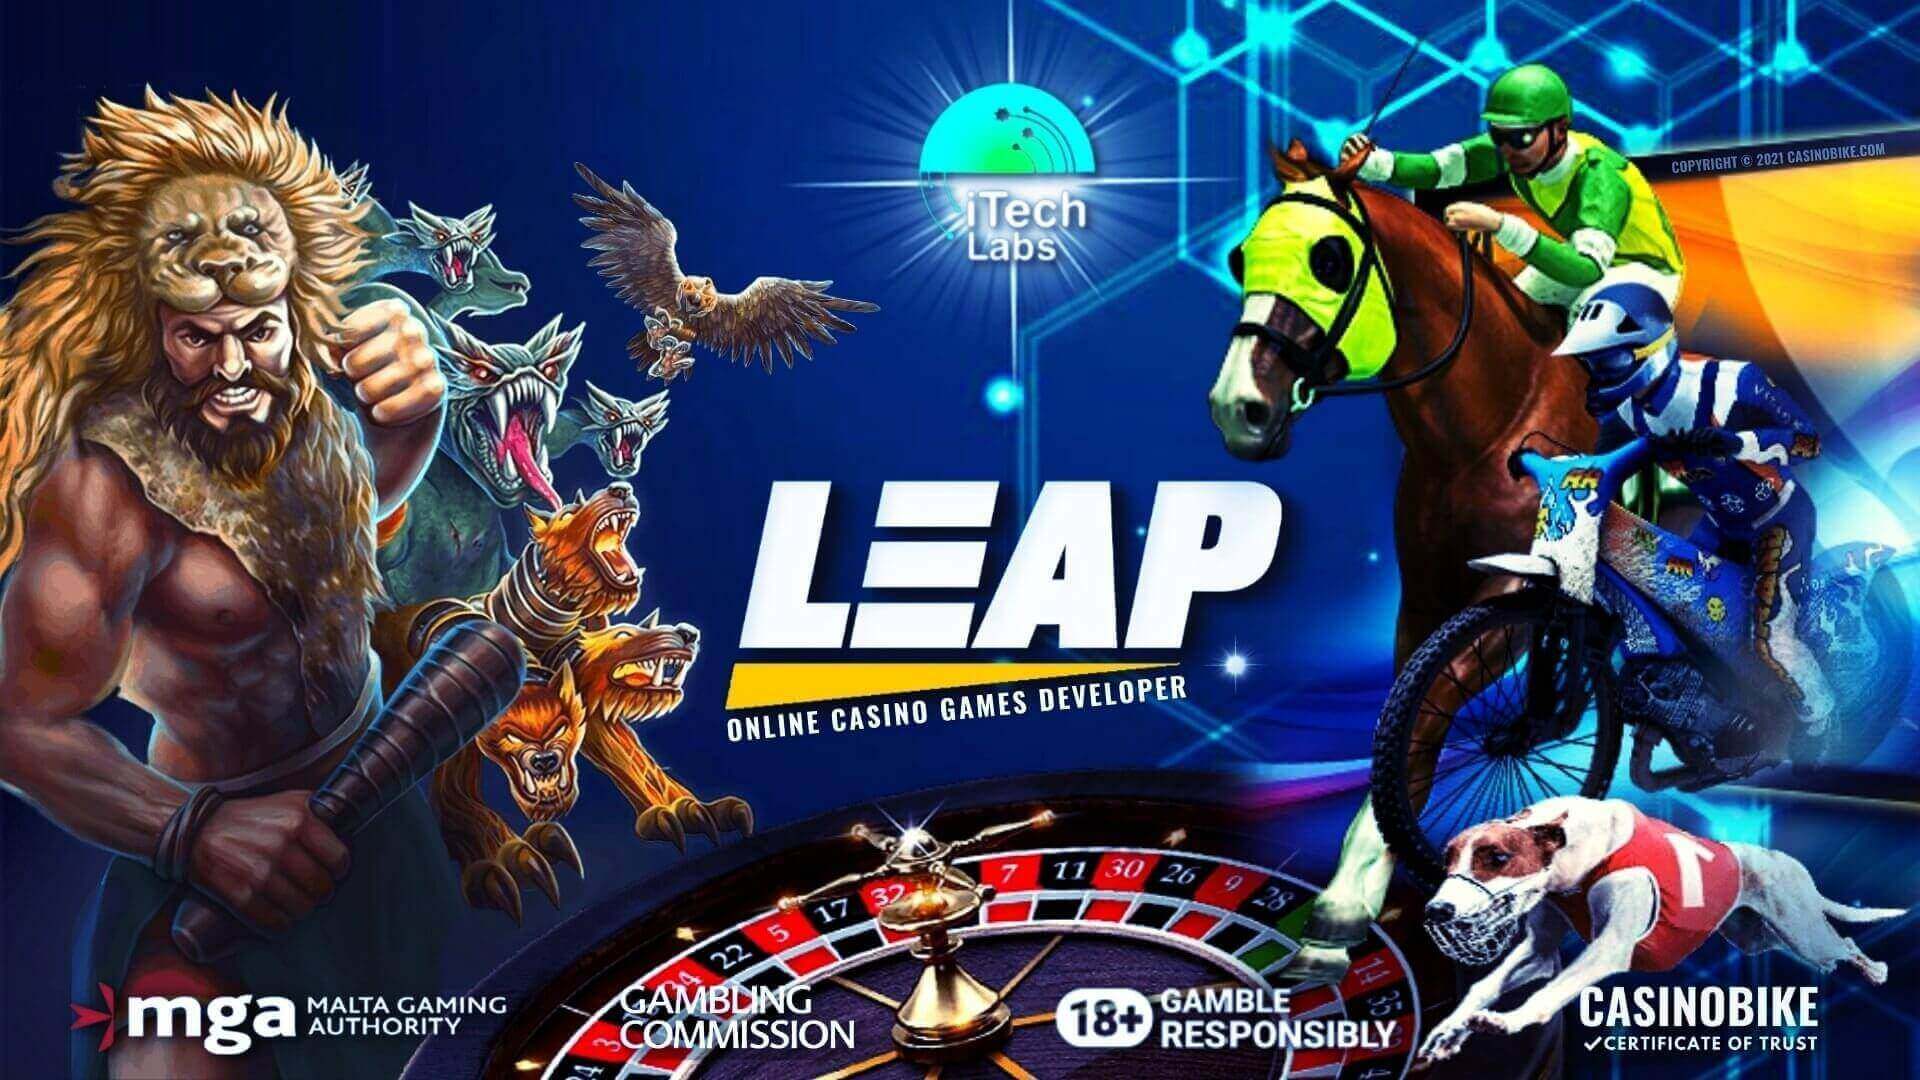 Leap Gaming Online Casino Games Developer Review